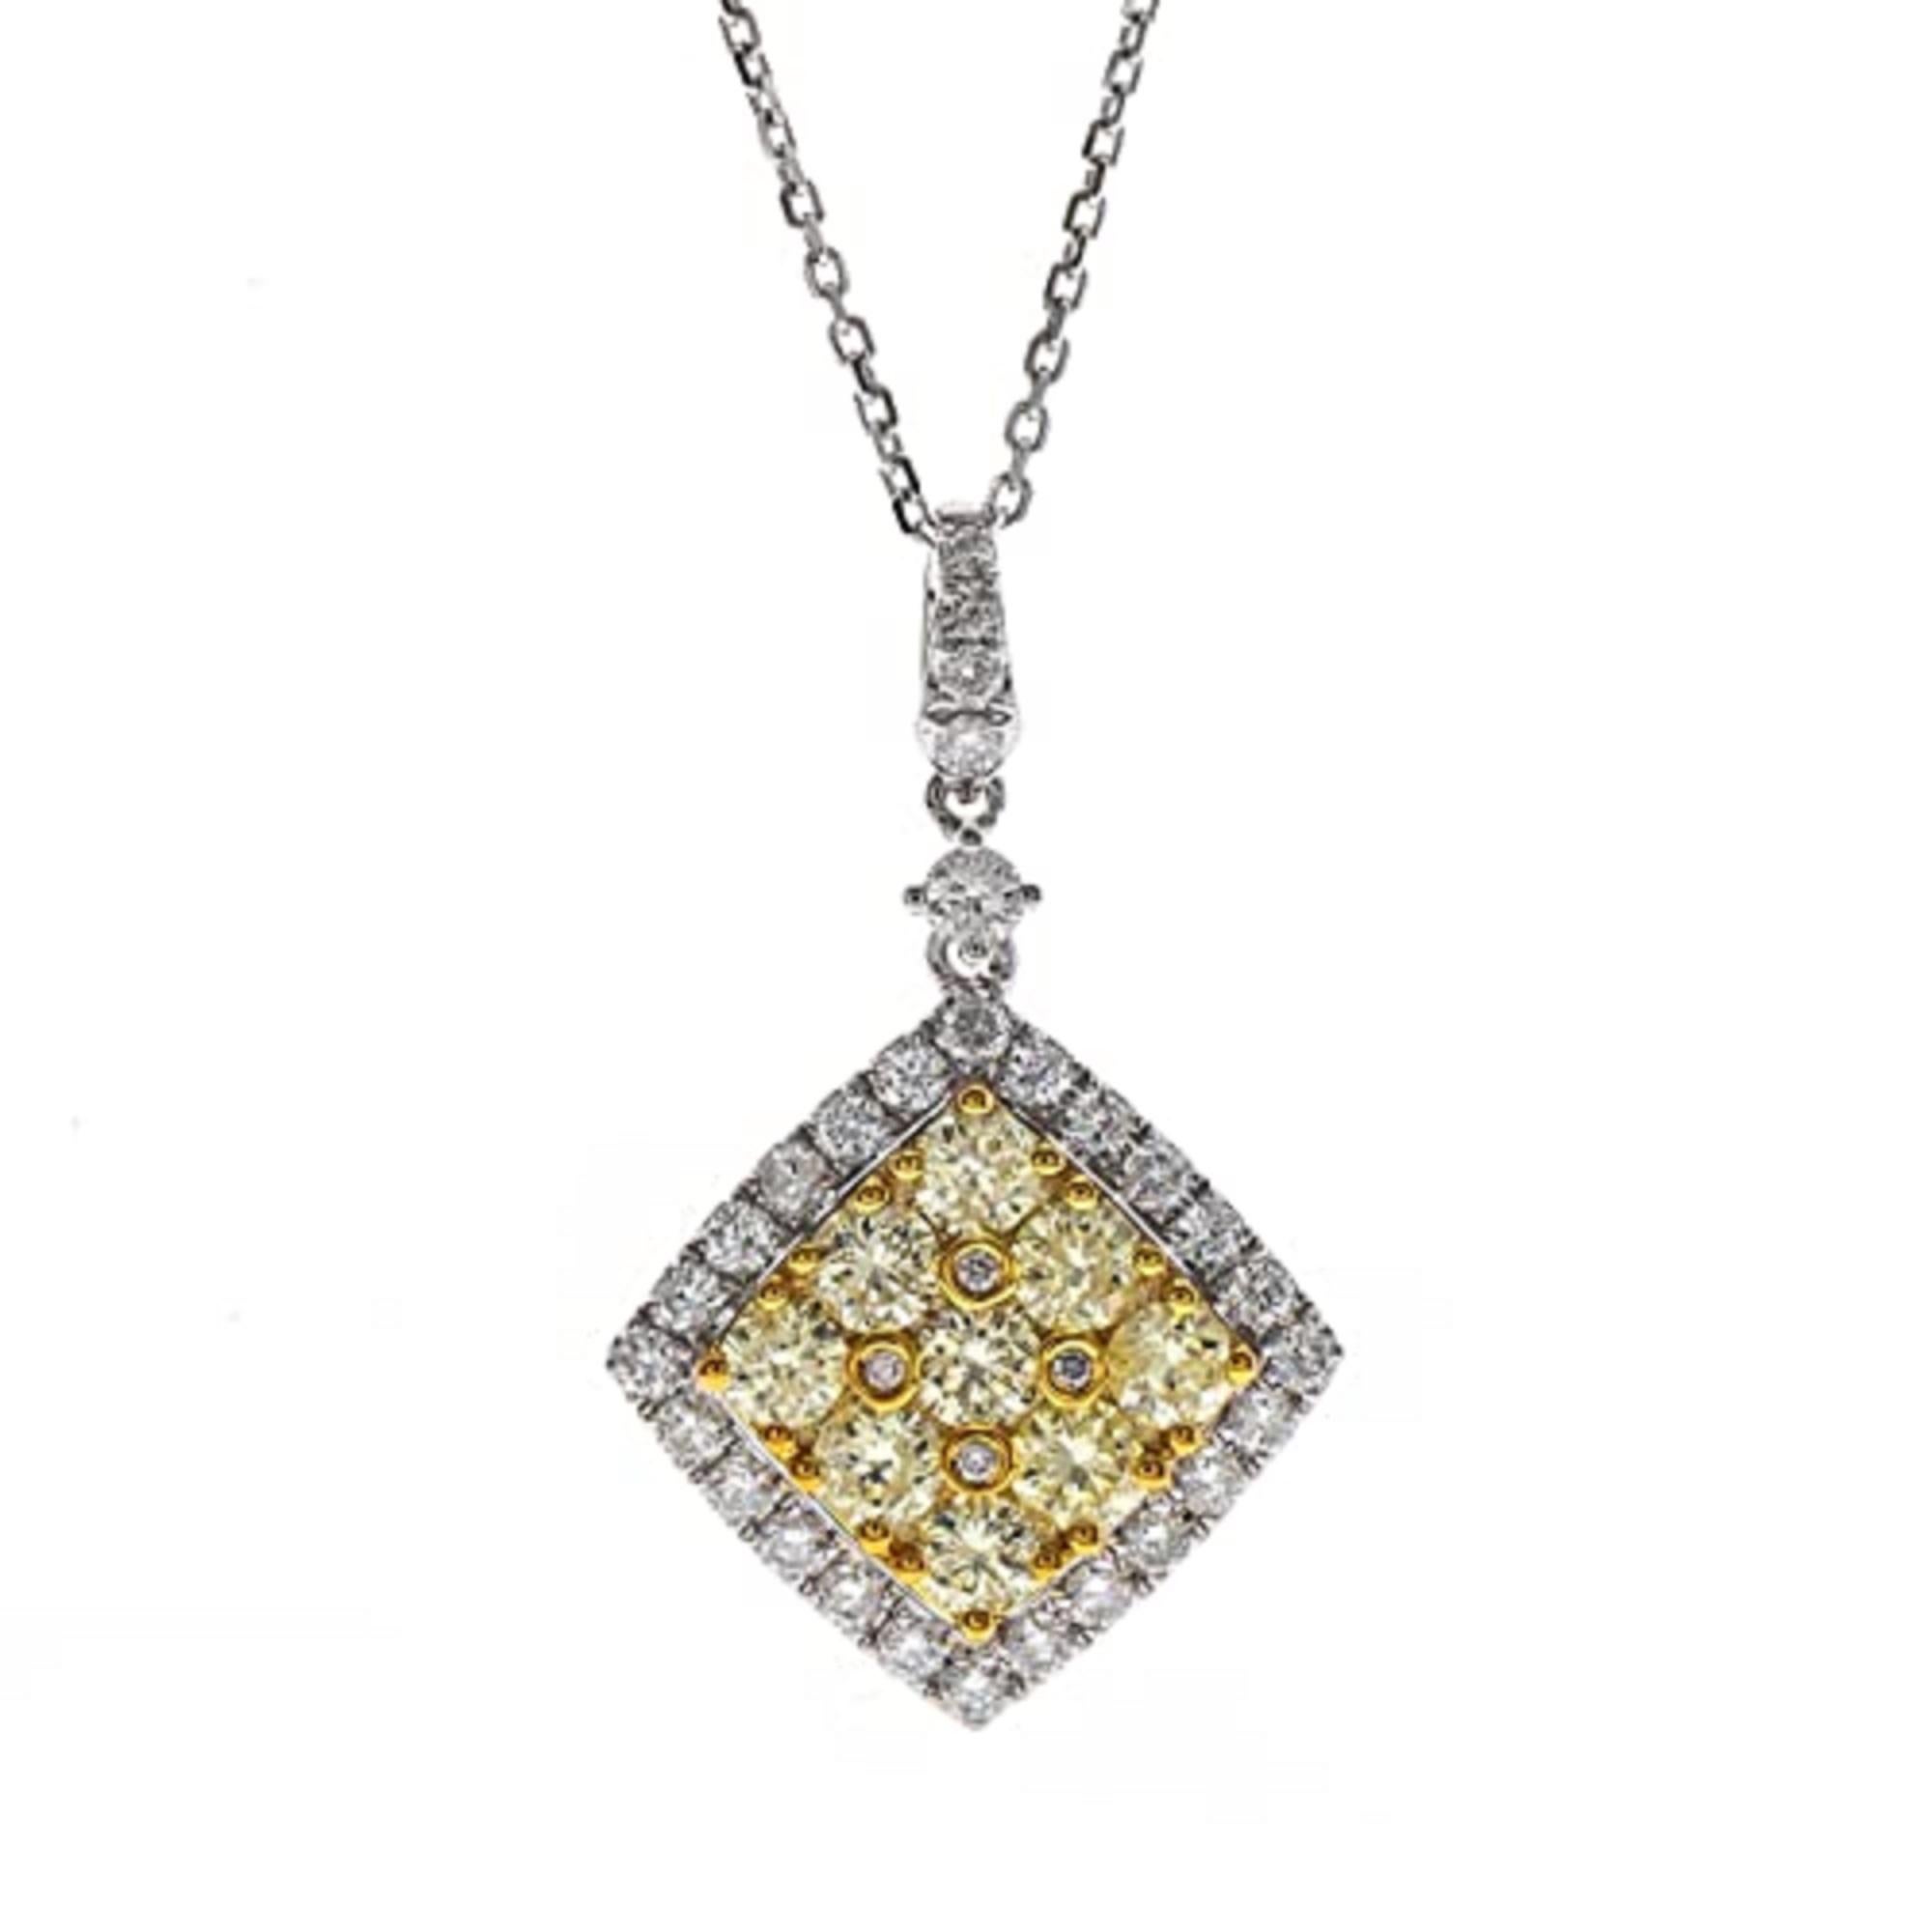 Decorate yourself in elegance with this Pendant is crafted from 14-karat Two-Tone Gold by Gin & Grace. This Pendant is Round-Cut Yellow Diamond (9 Pcs) 0.98 Carat and Round-cut White Diamond (37 Pcs) 0.68 Carat. This Pendant is weight 2.90 grams and